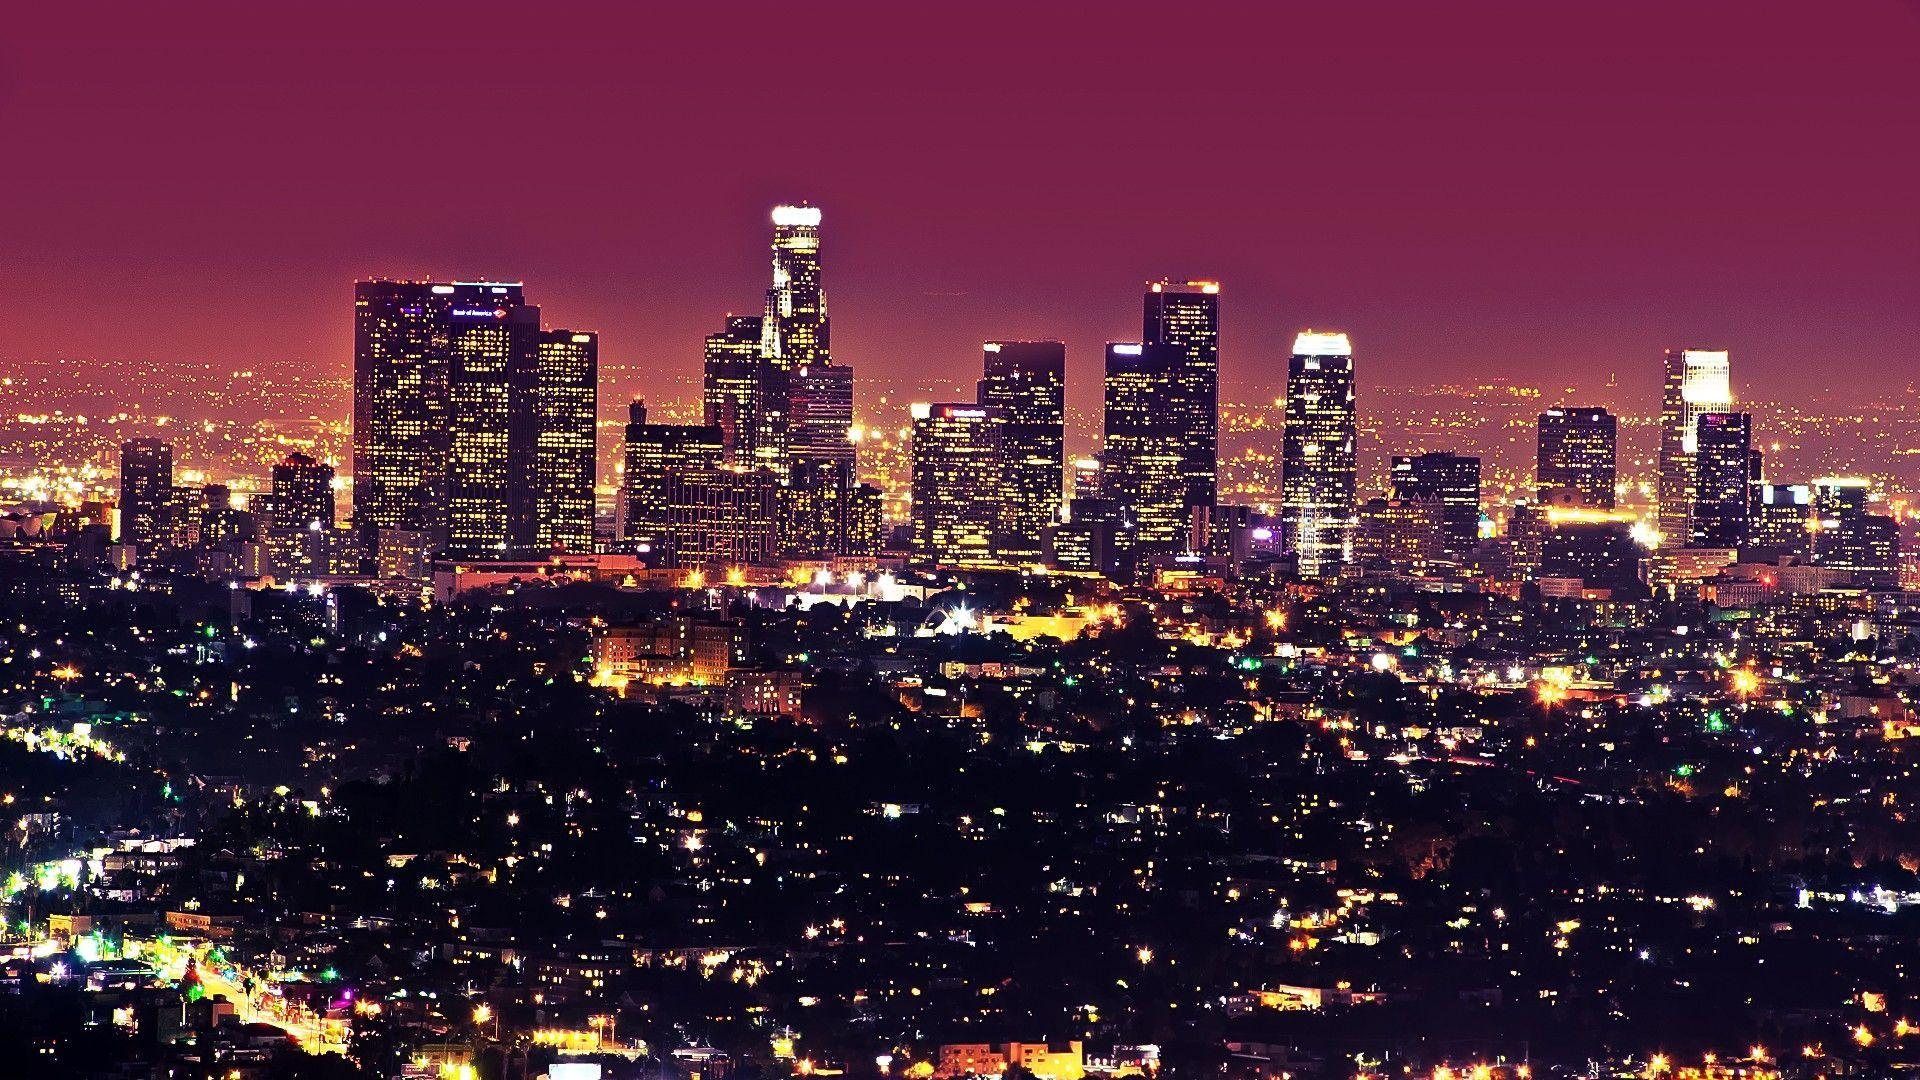 A night view of the city of Los Angeles - Los Angeles